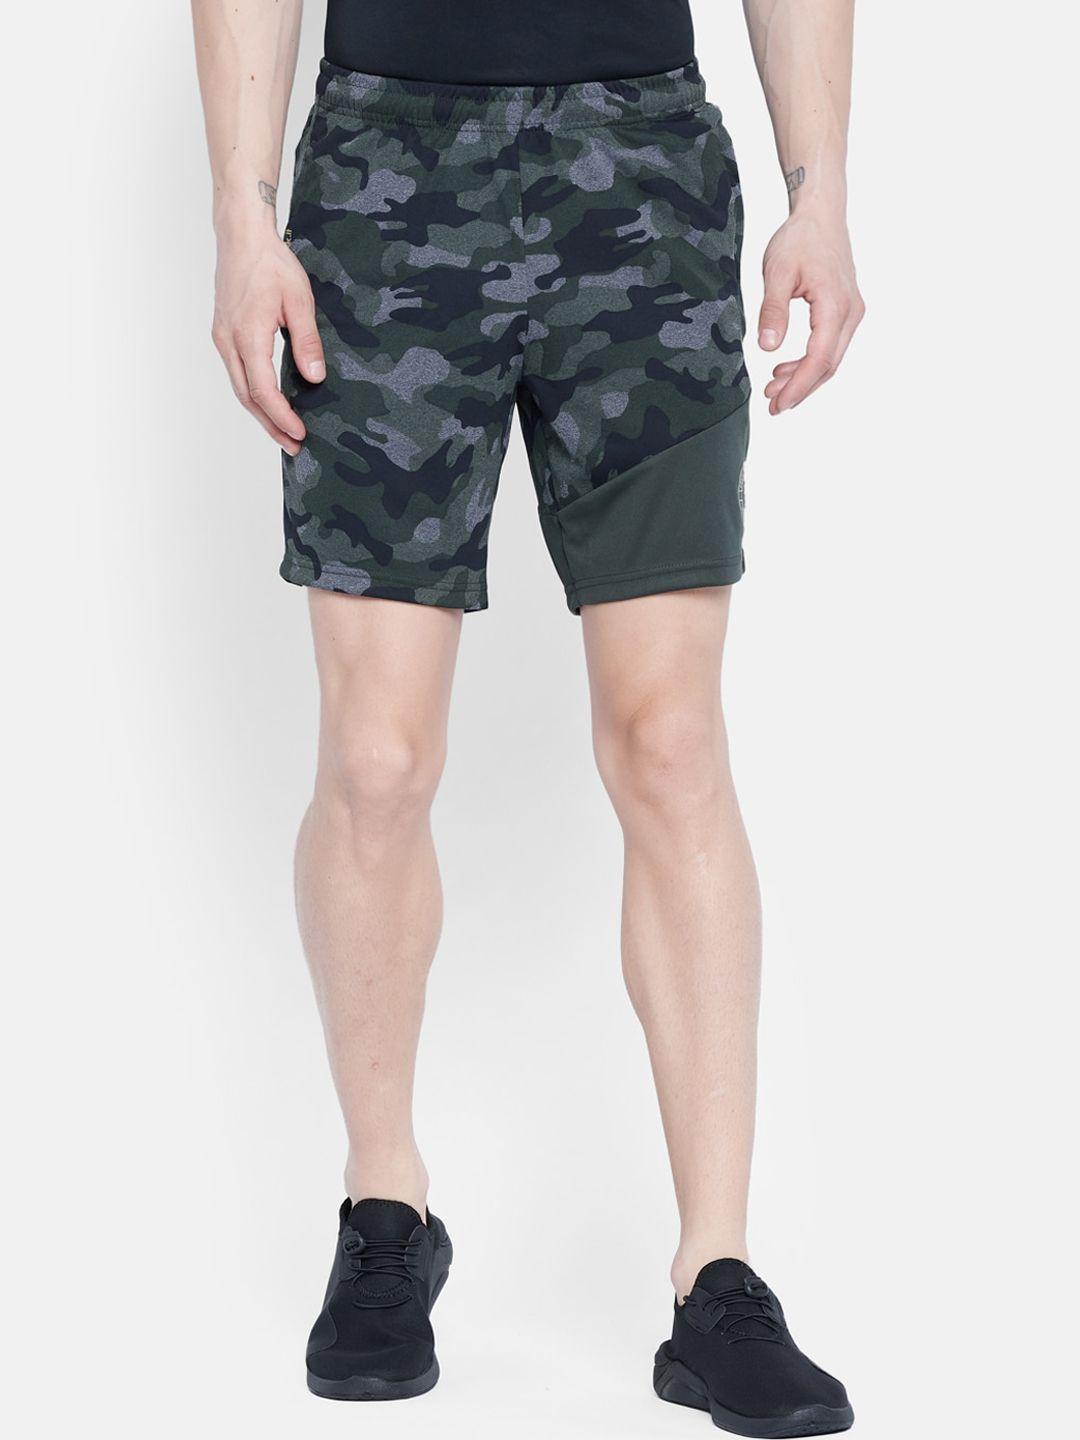 rock-it-men-olive-green-camouflage-printed-mid-rise-sports-shorts